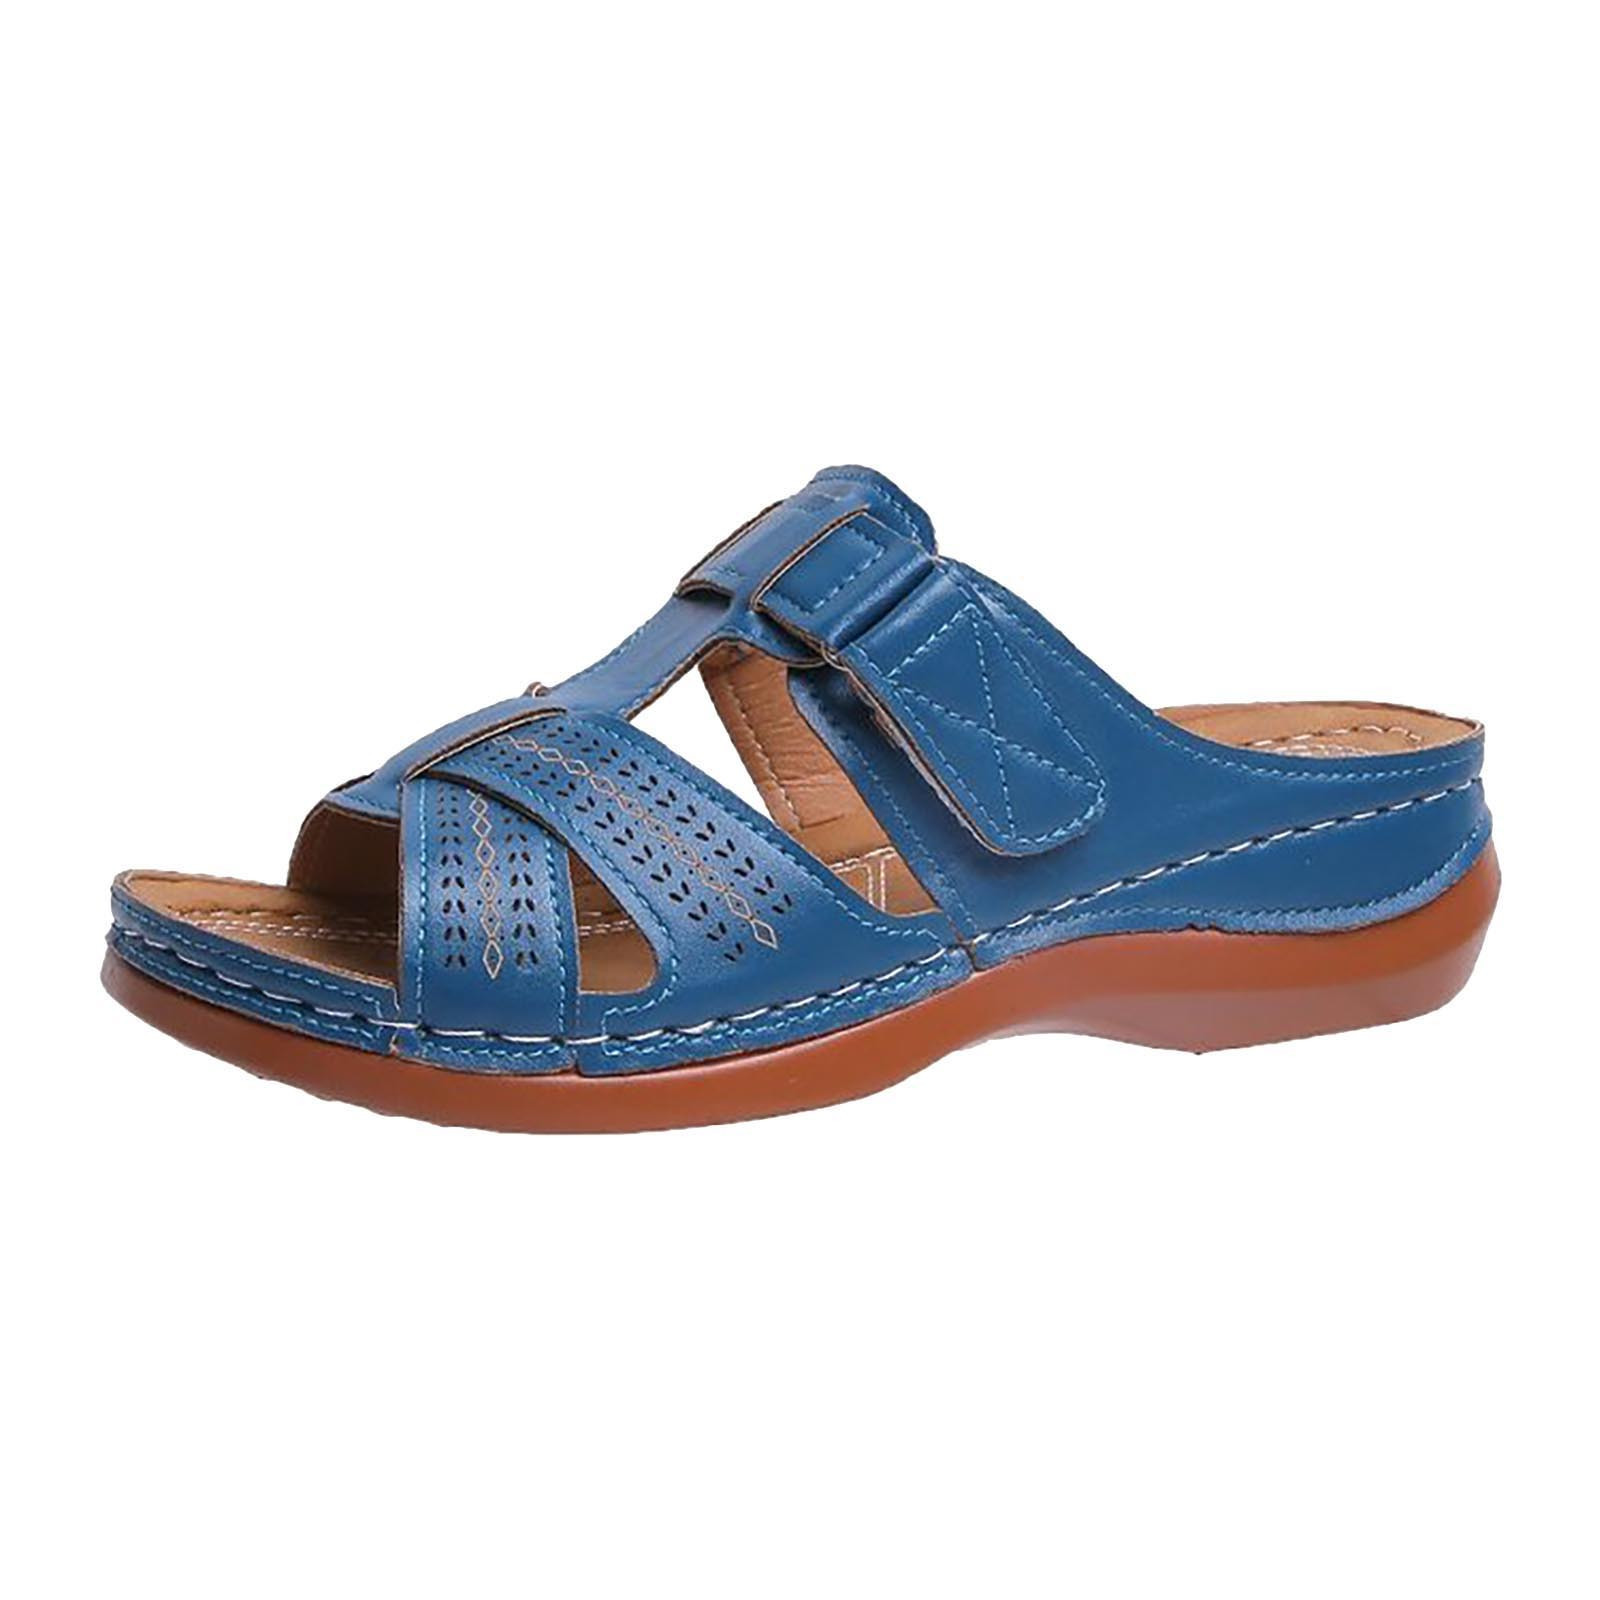 Sandals for Women Dressy Summer Orthopedic Sandals with Arch Support ...